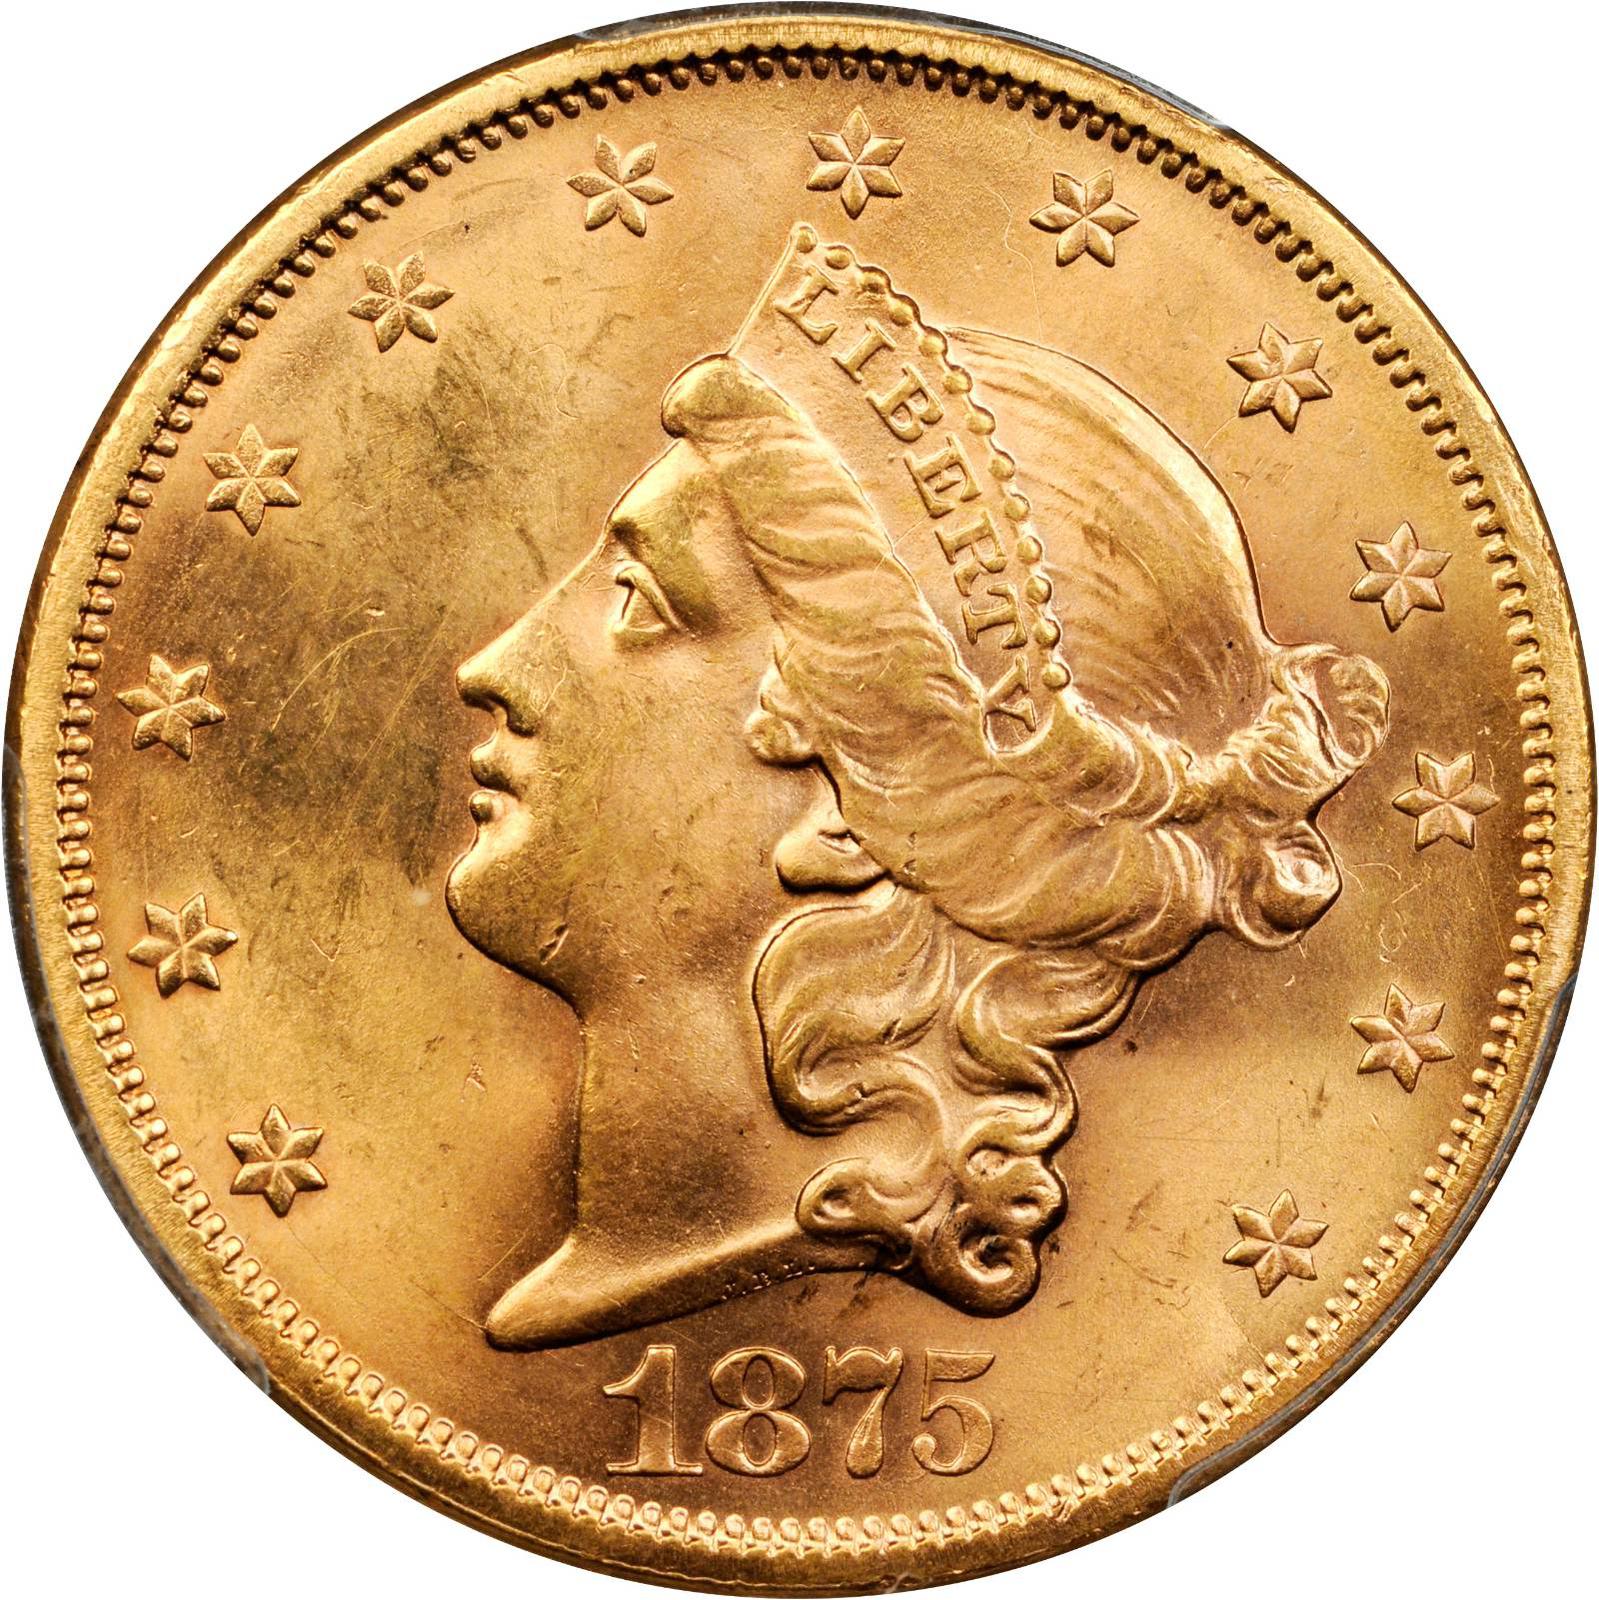 Value of 1875-S $20 Liberty Double Eagle | Sell Rare Coins